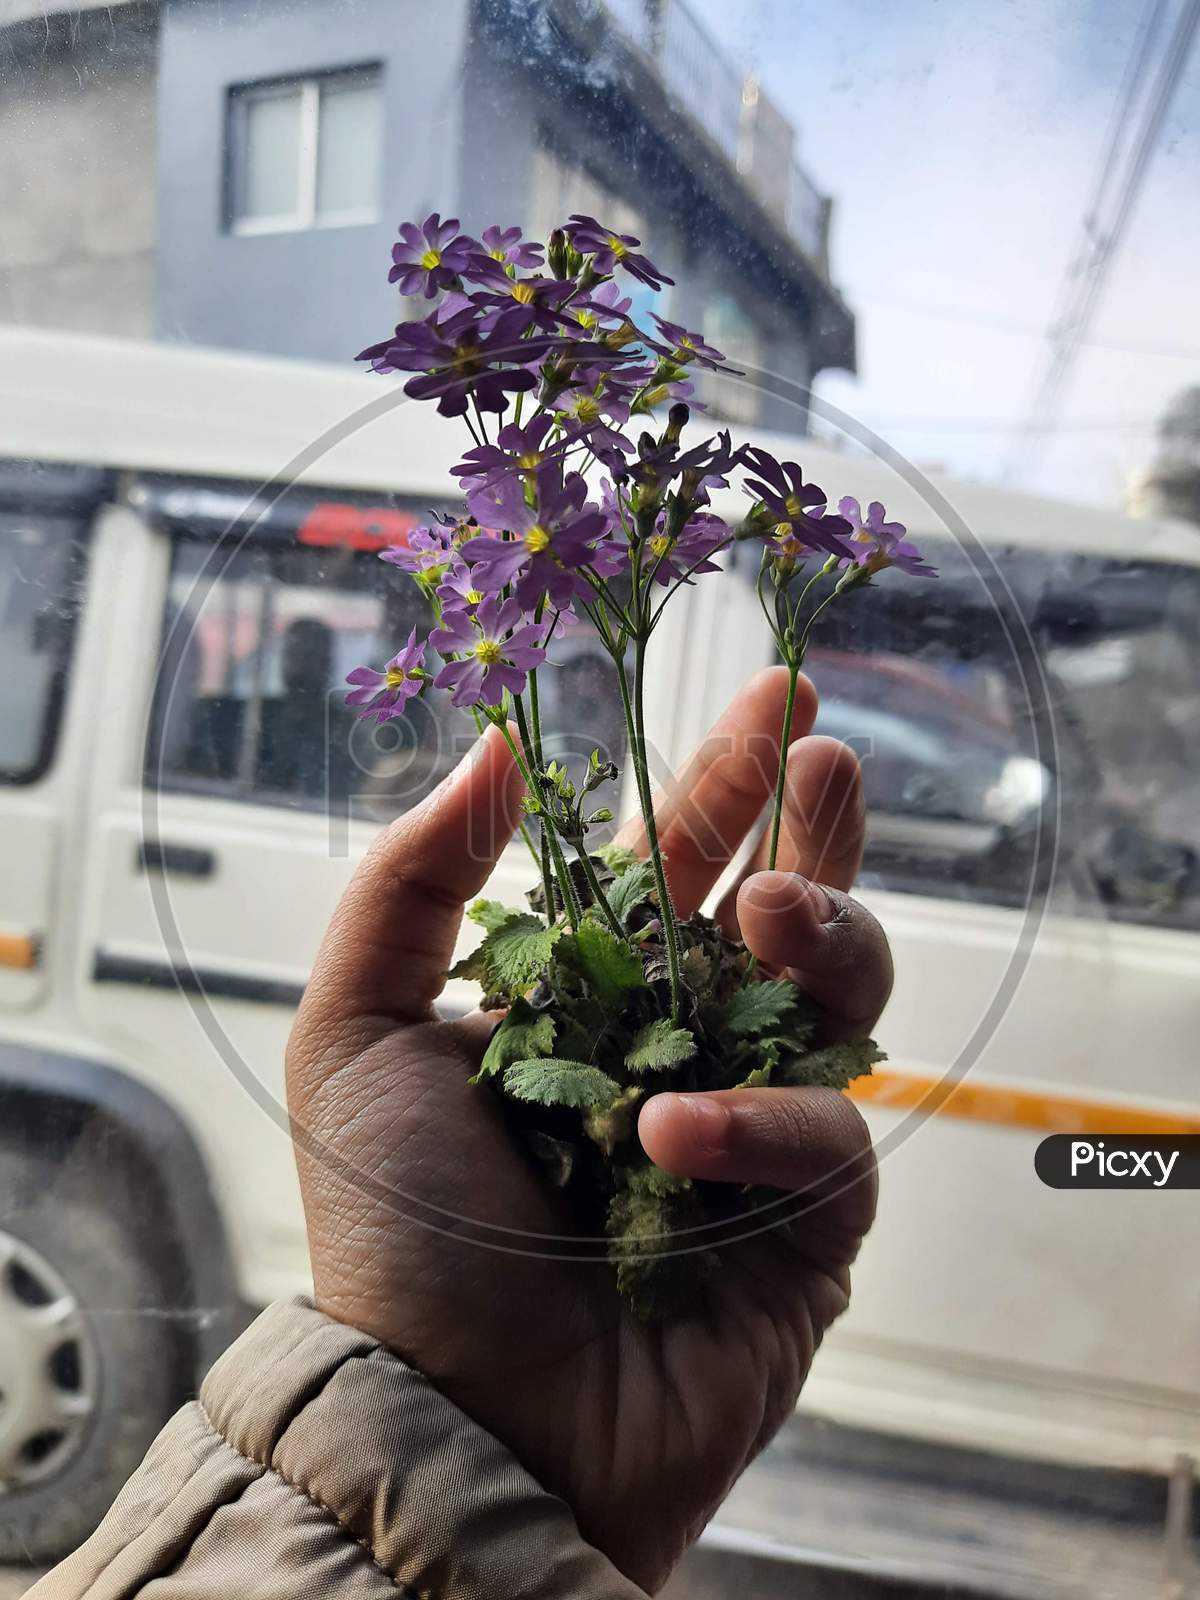 Very beautiful flowers holding in hand.